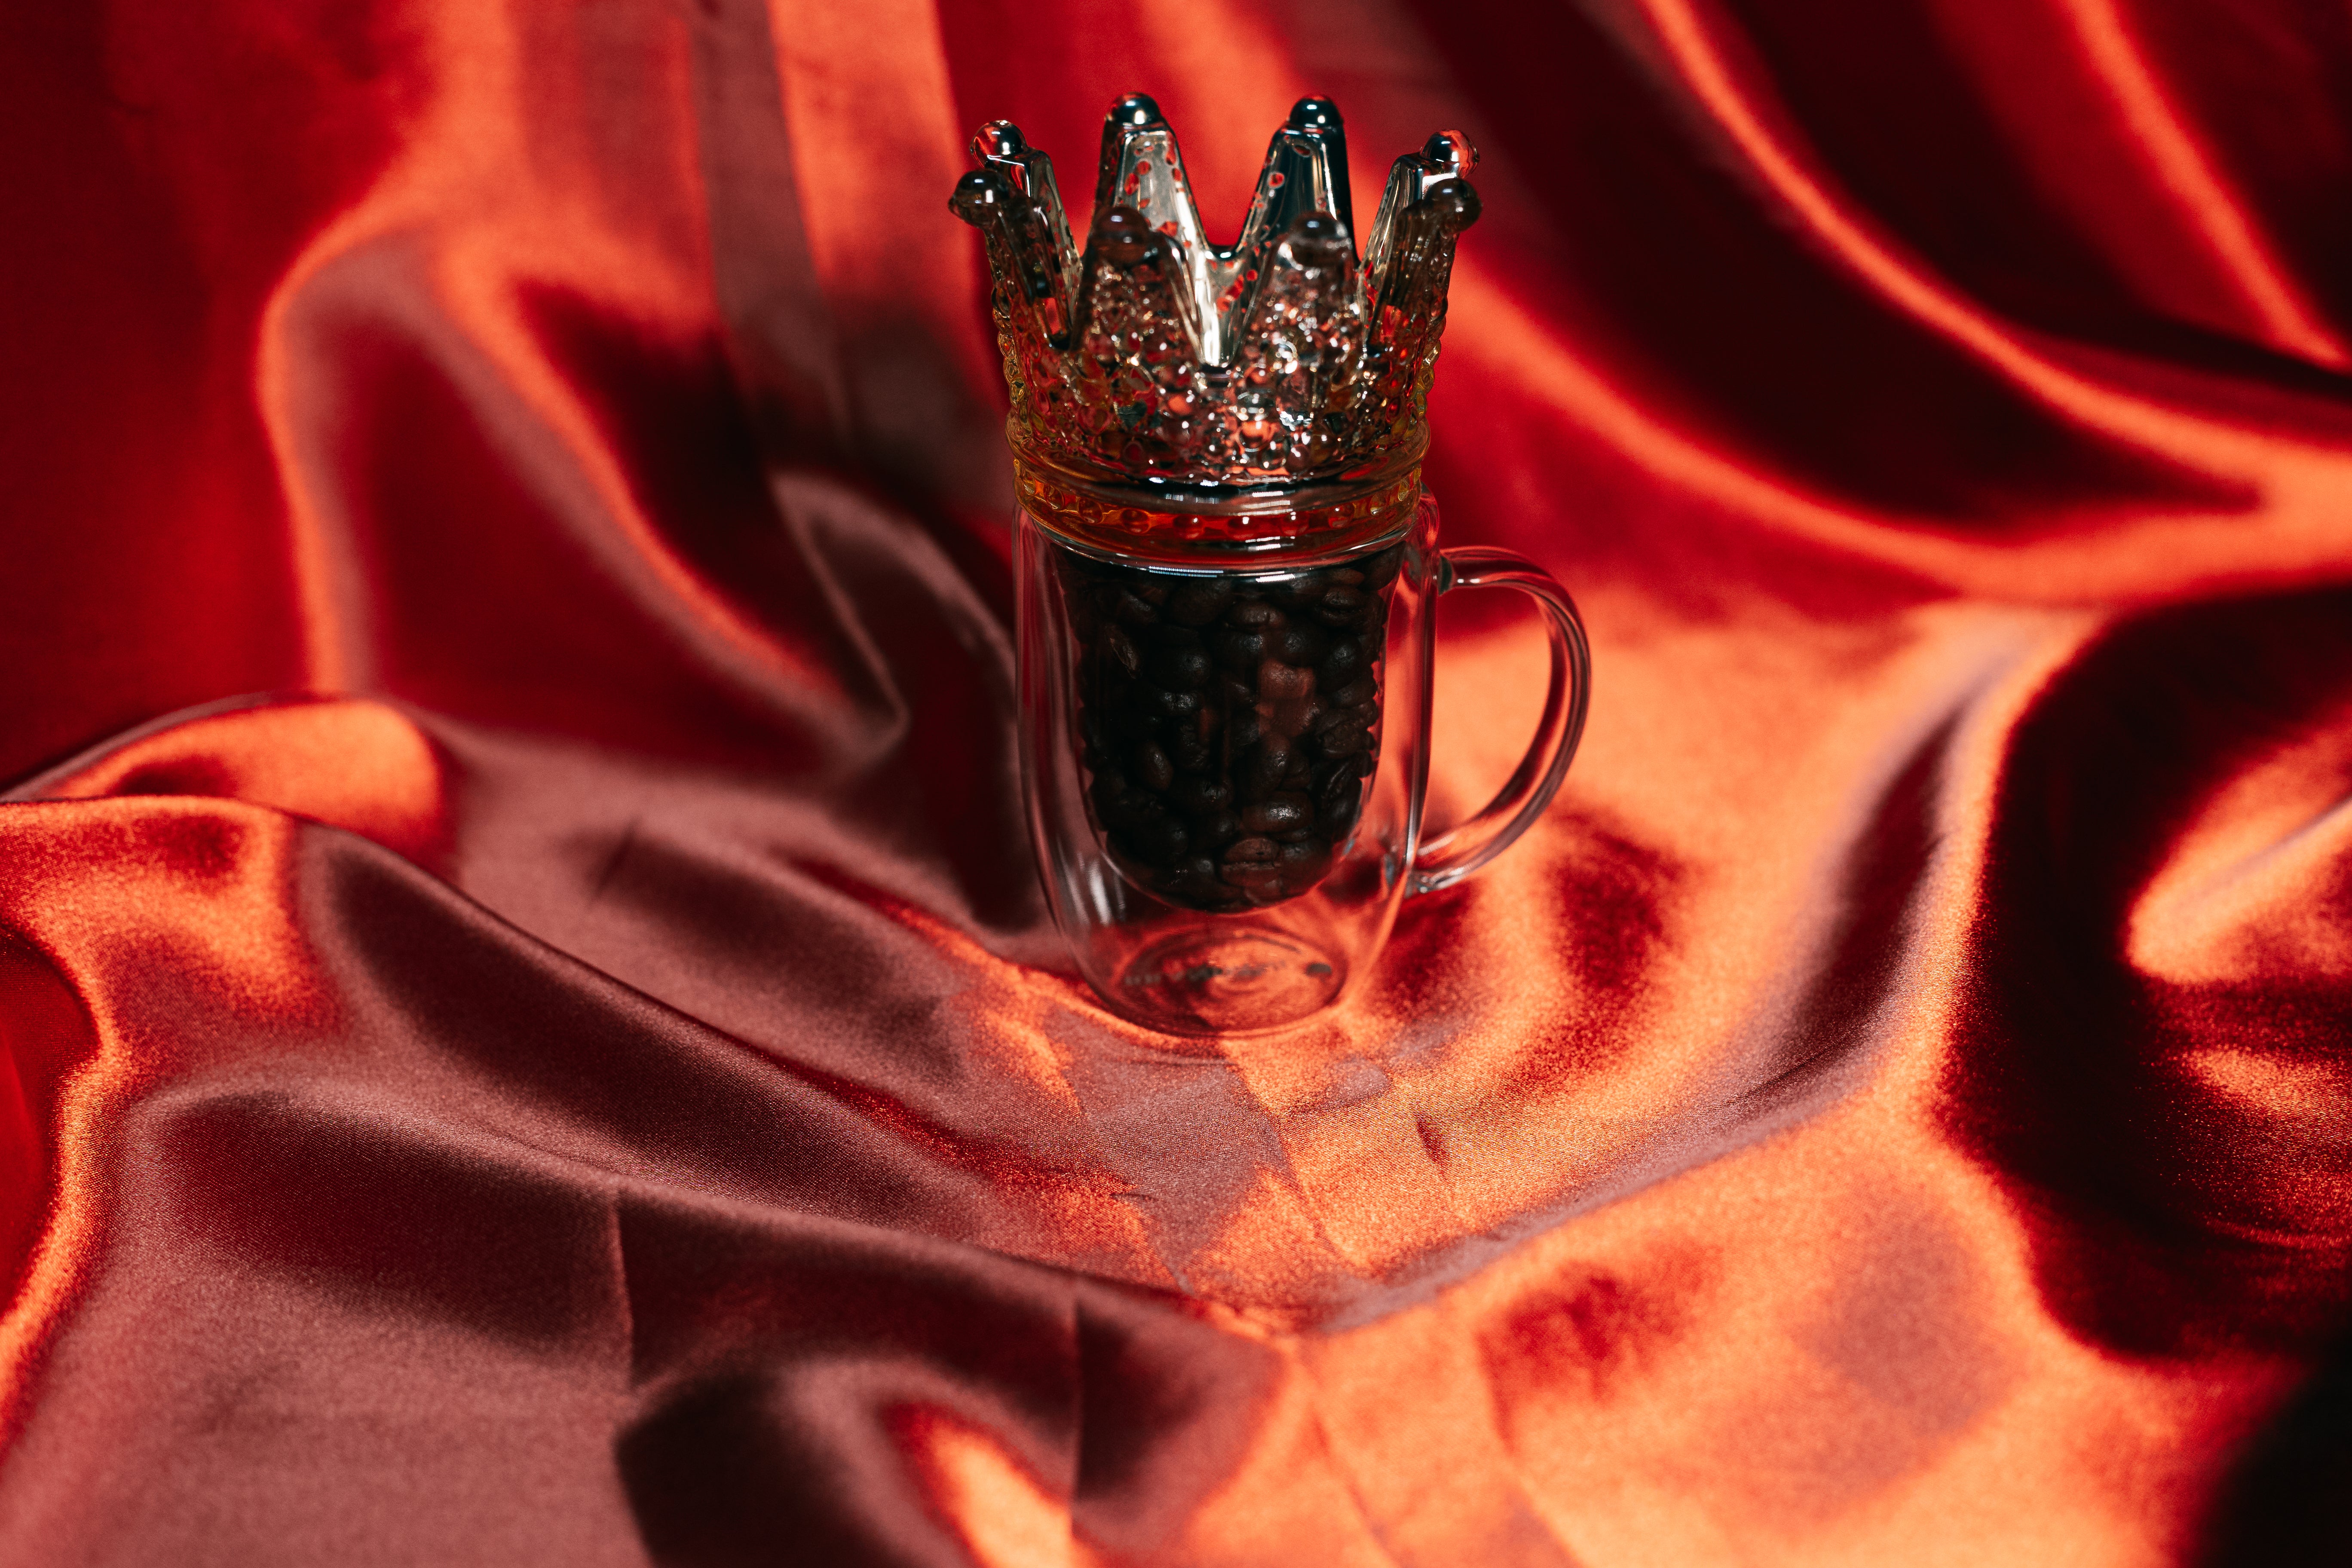 A majestic glass mug filled with Coffee Kingz beans and topped with a king crown, set against a rich red satin backdrop, suggesting royalty or the regal nature of Coffee Kingz to its enthusiasts.